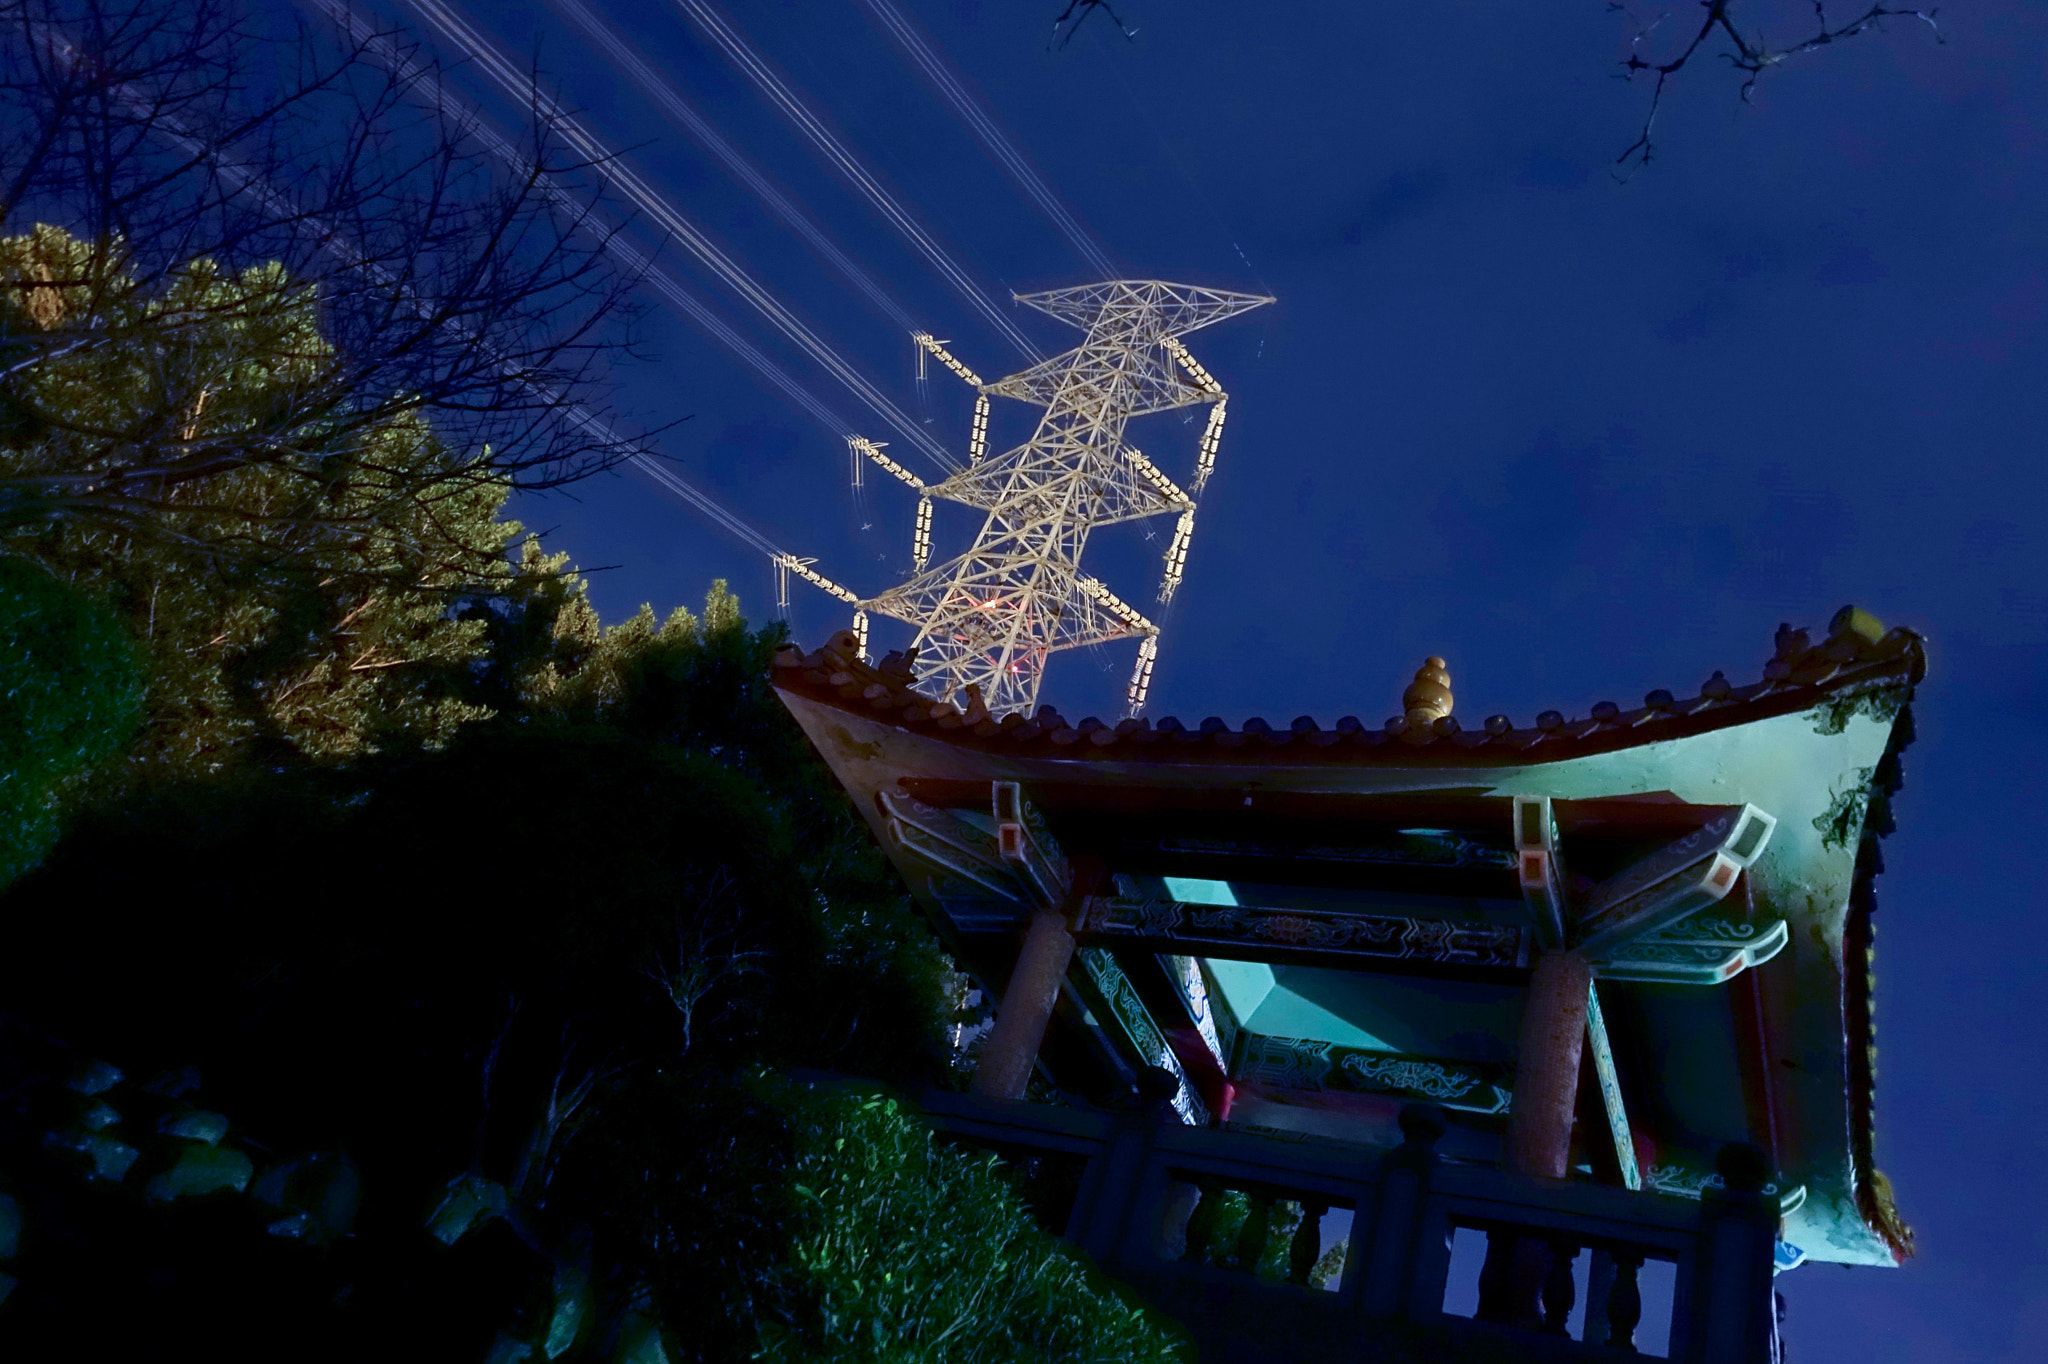 Sony DSC-RX100M5 + Sony 24-70mm F1.8-2.8 sample photo. High voltage tower over guandu temple 關渡宮，taipei photography